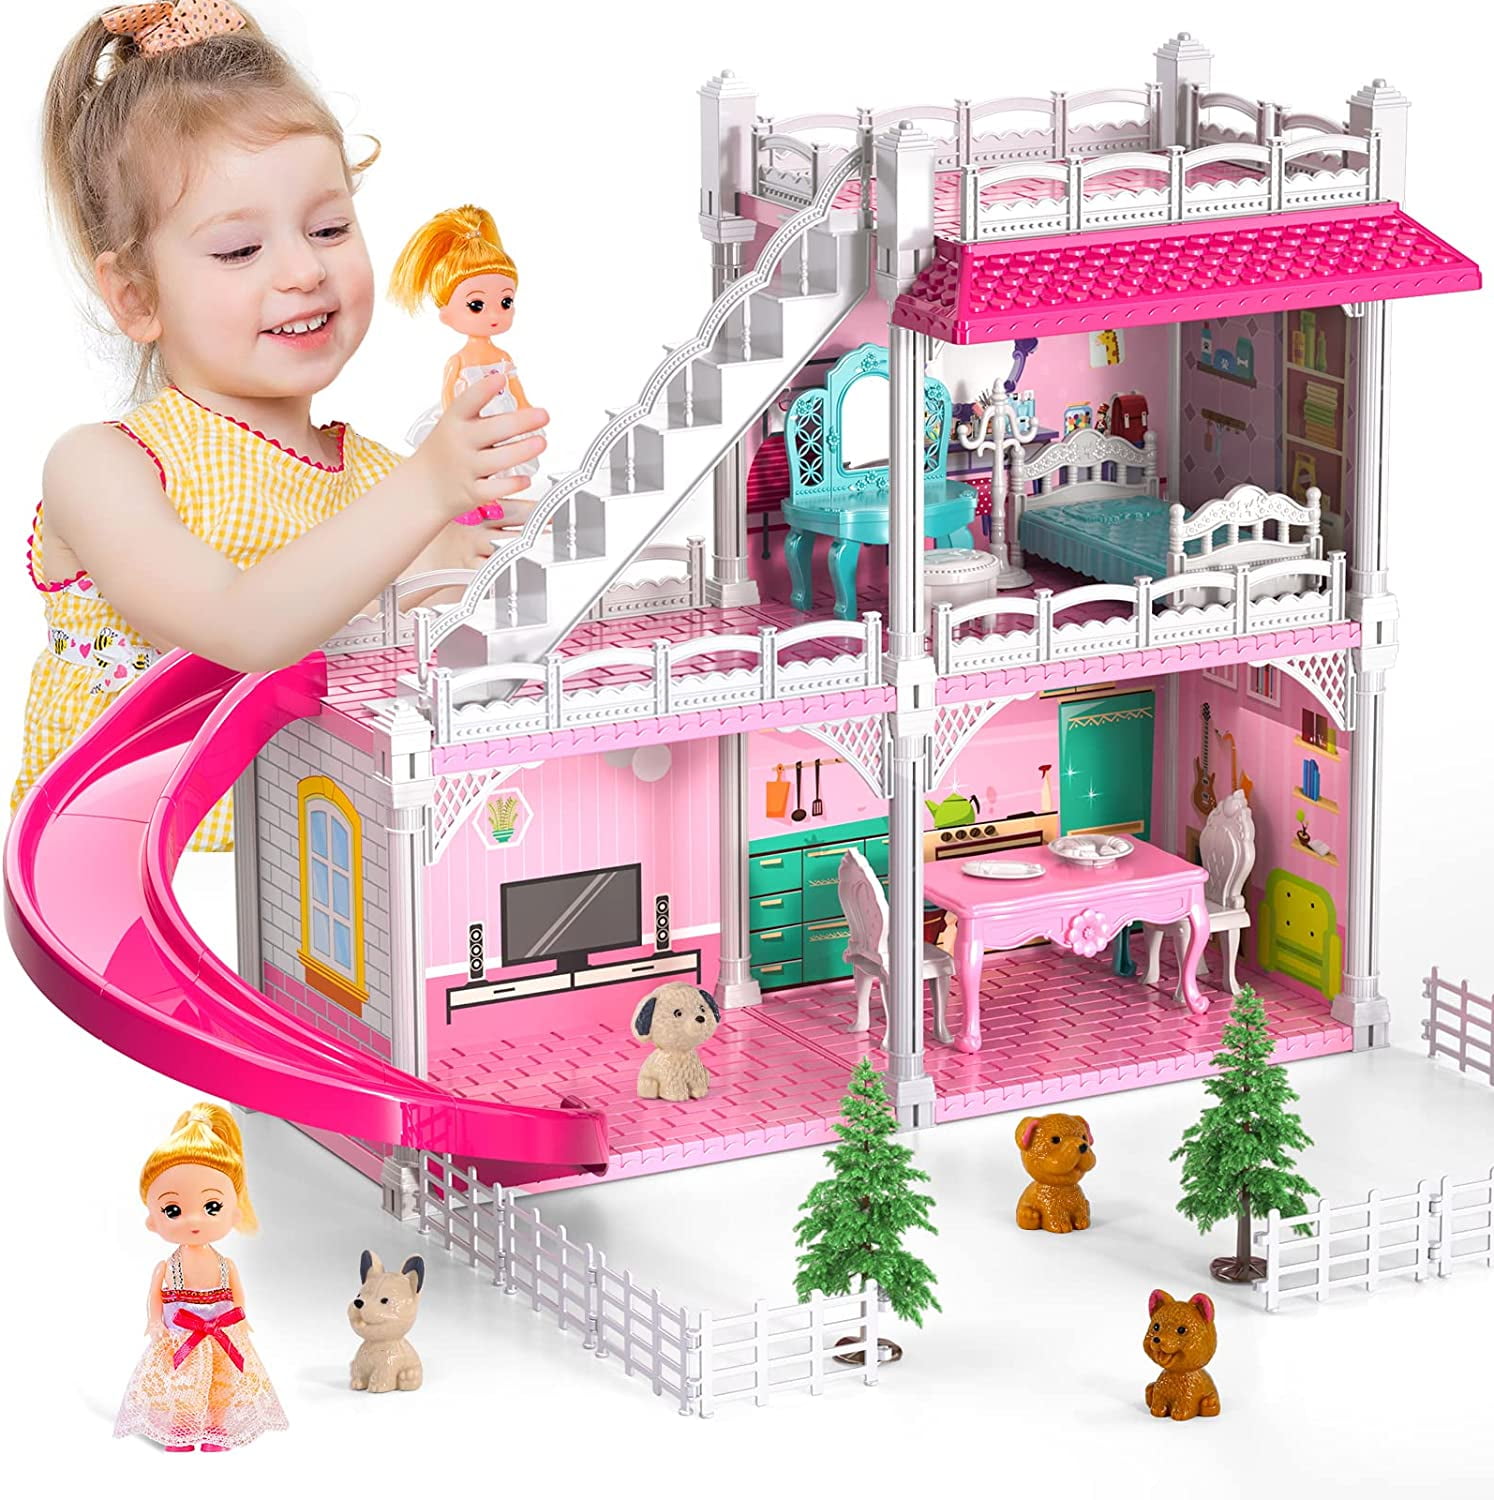 Doll House, Dream Doll House Furniture Pink Girl Toys, 3 Stories 7 Rooms  Dollhouse with 2 Princesses Slide Accessories, Toddler Playhouse Gift for  for